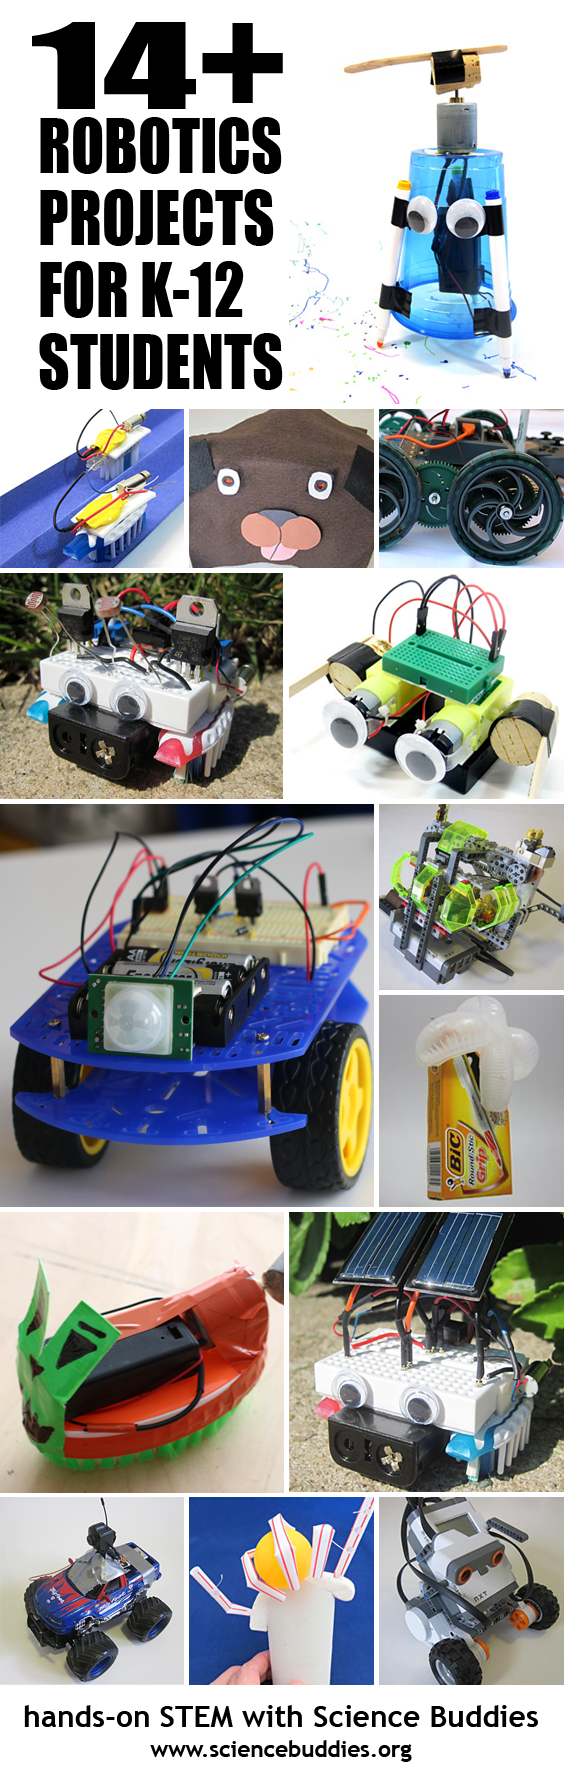 20+ Robotics Projects, Lessons, and Activities for Teachers